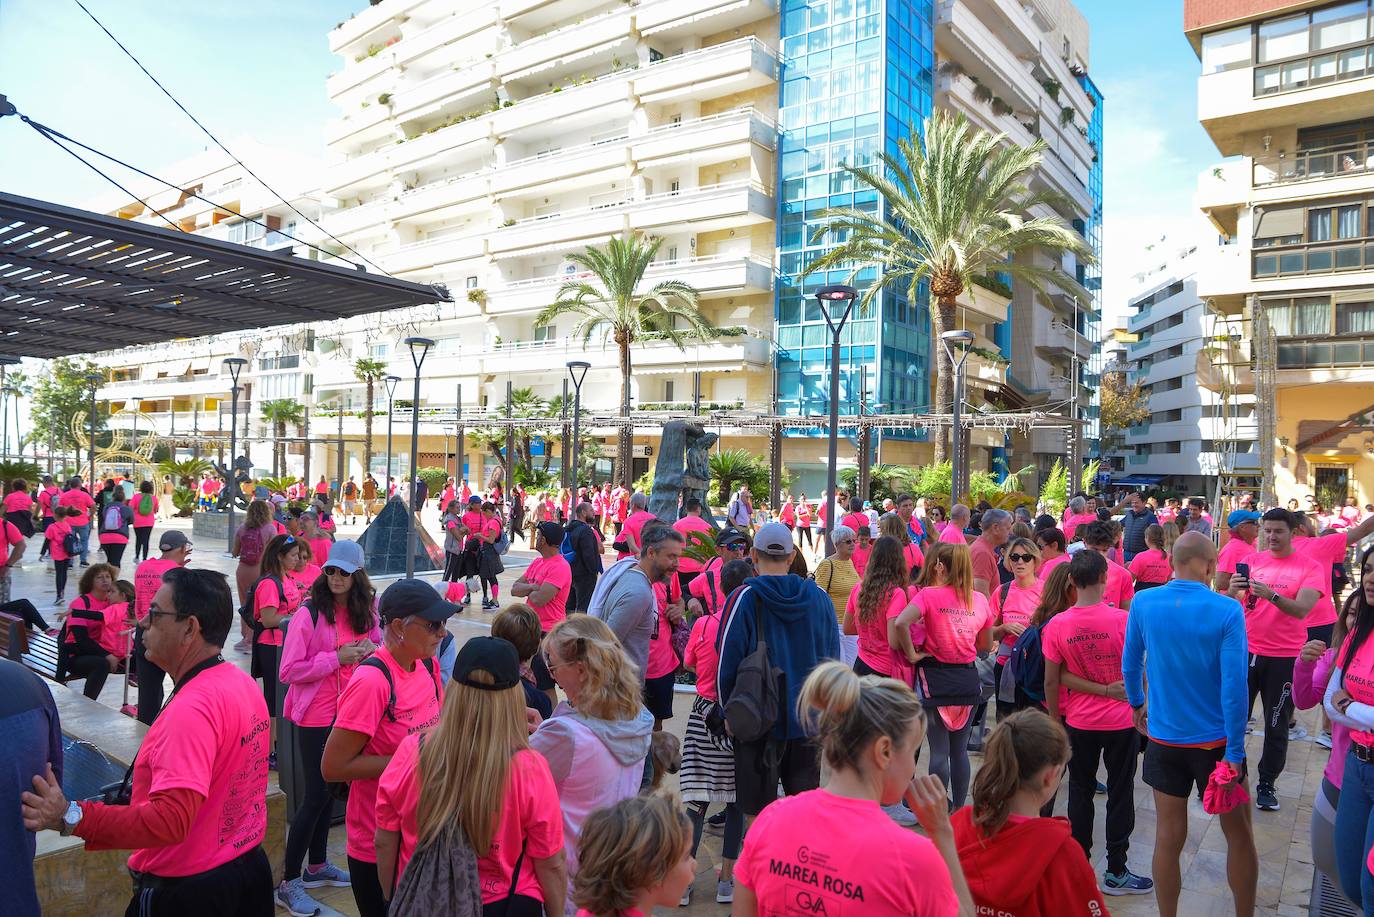 Wave of pink in Marbella as more than 3,000 take part in cancer awareness walk